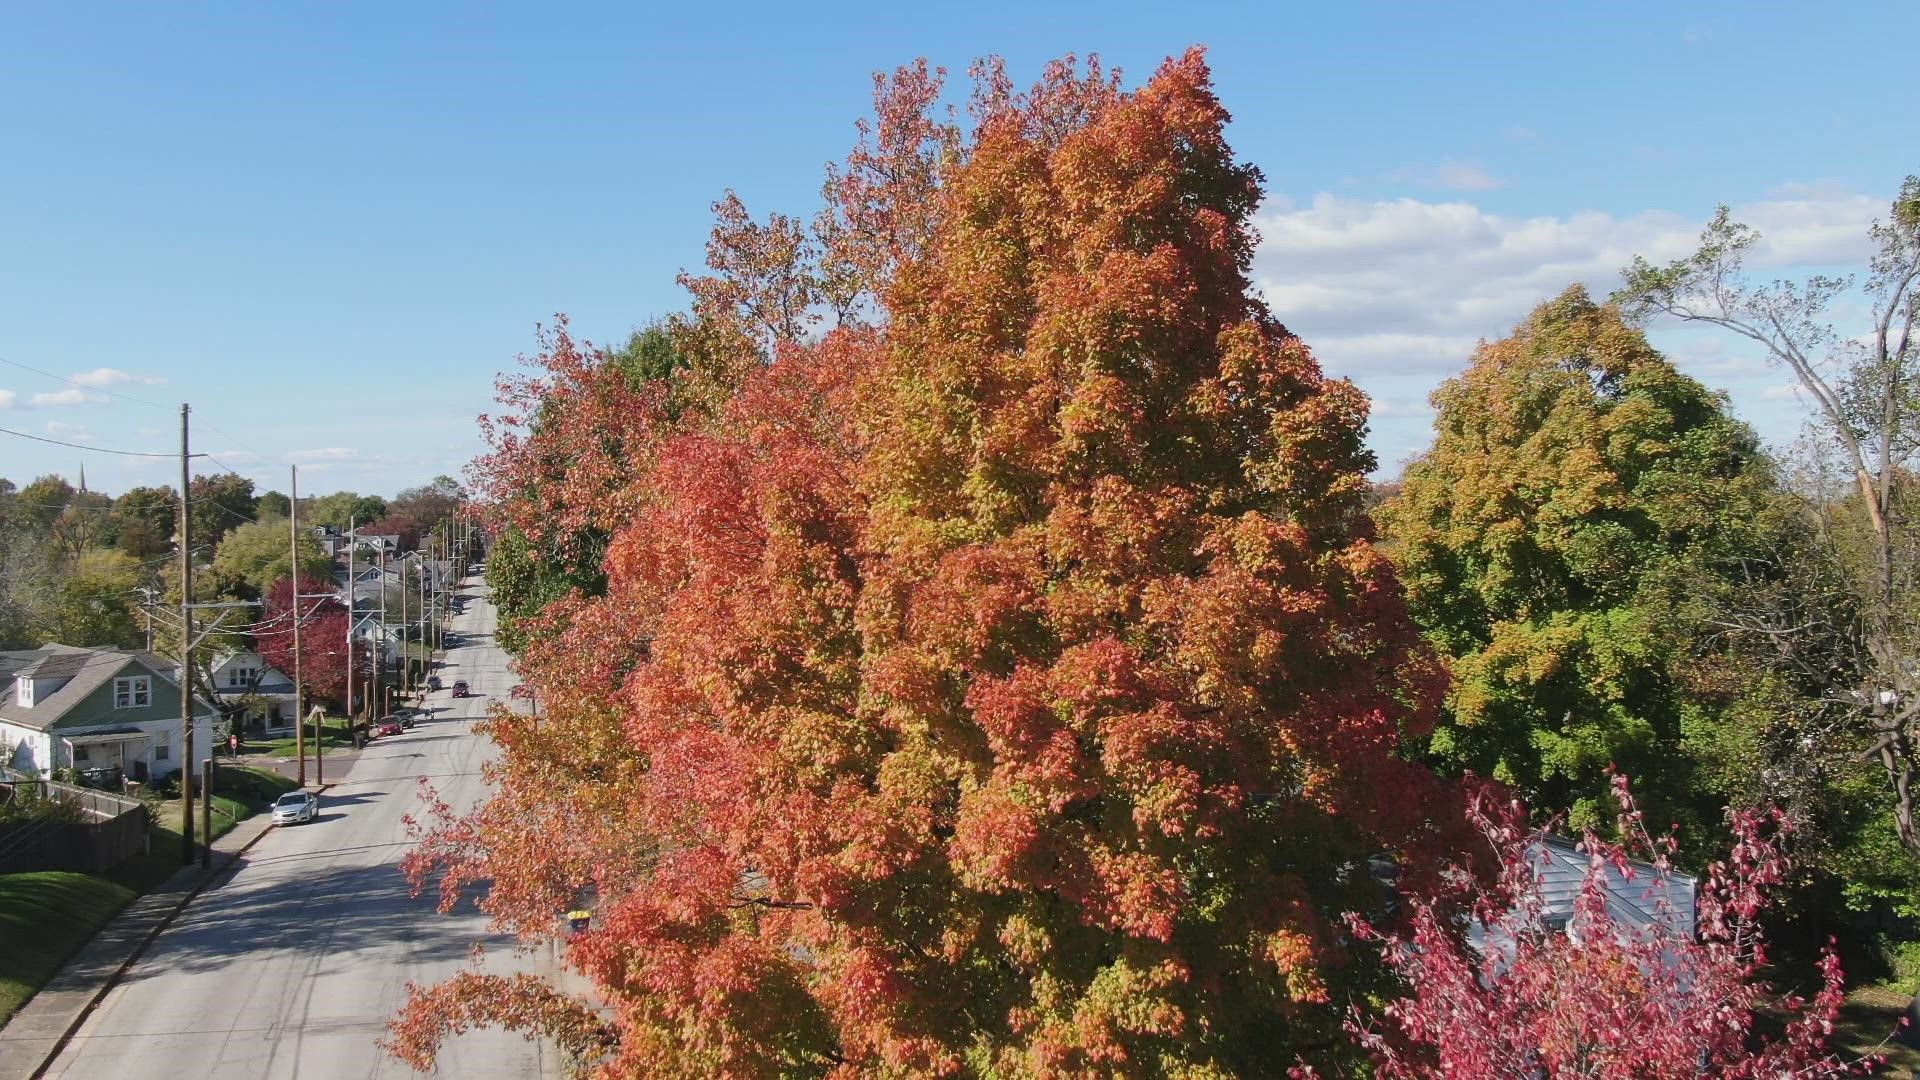 Sky Lens 5 captured the fall colors in Washington, MO on Wednesday.